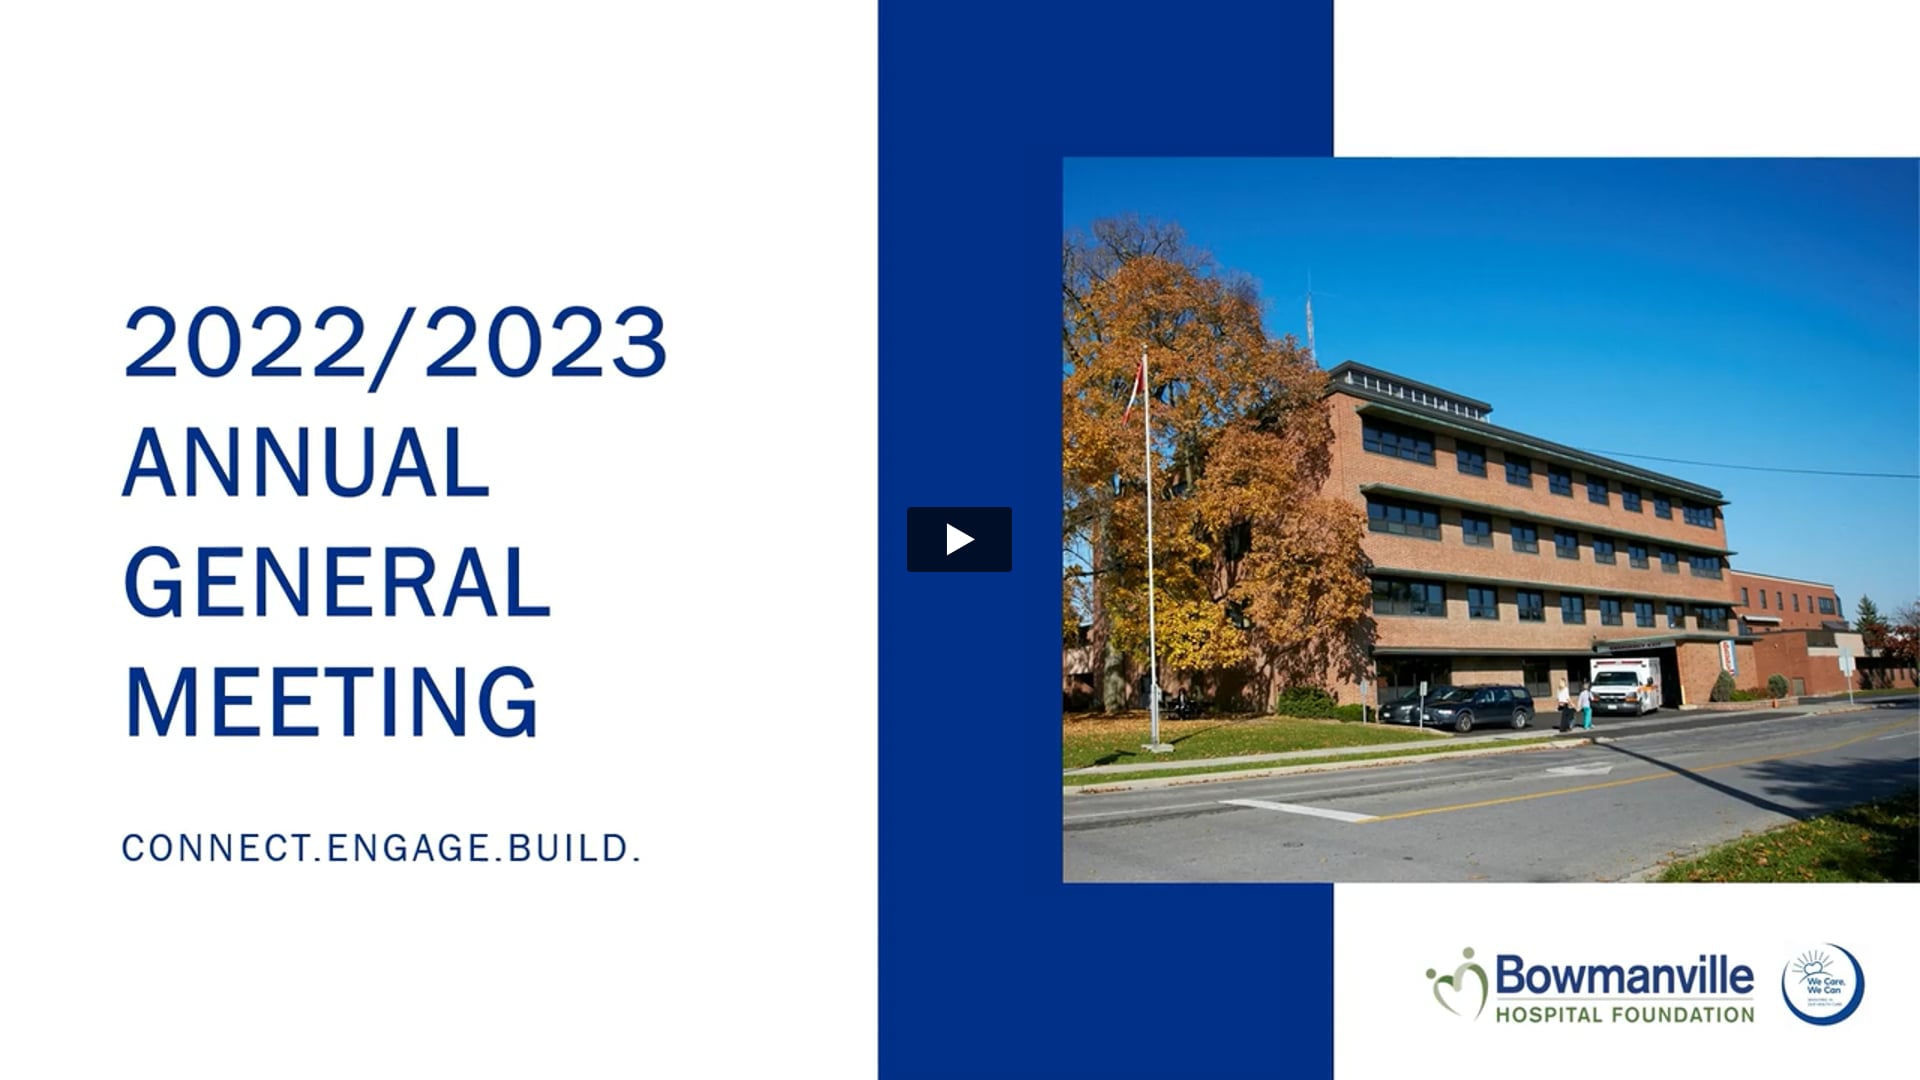 Video from the 2022/2023 Annual General Meeting